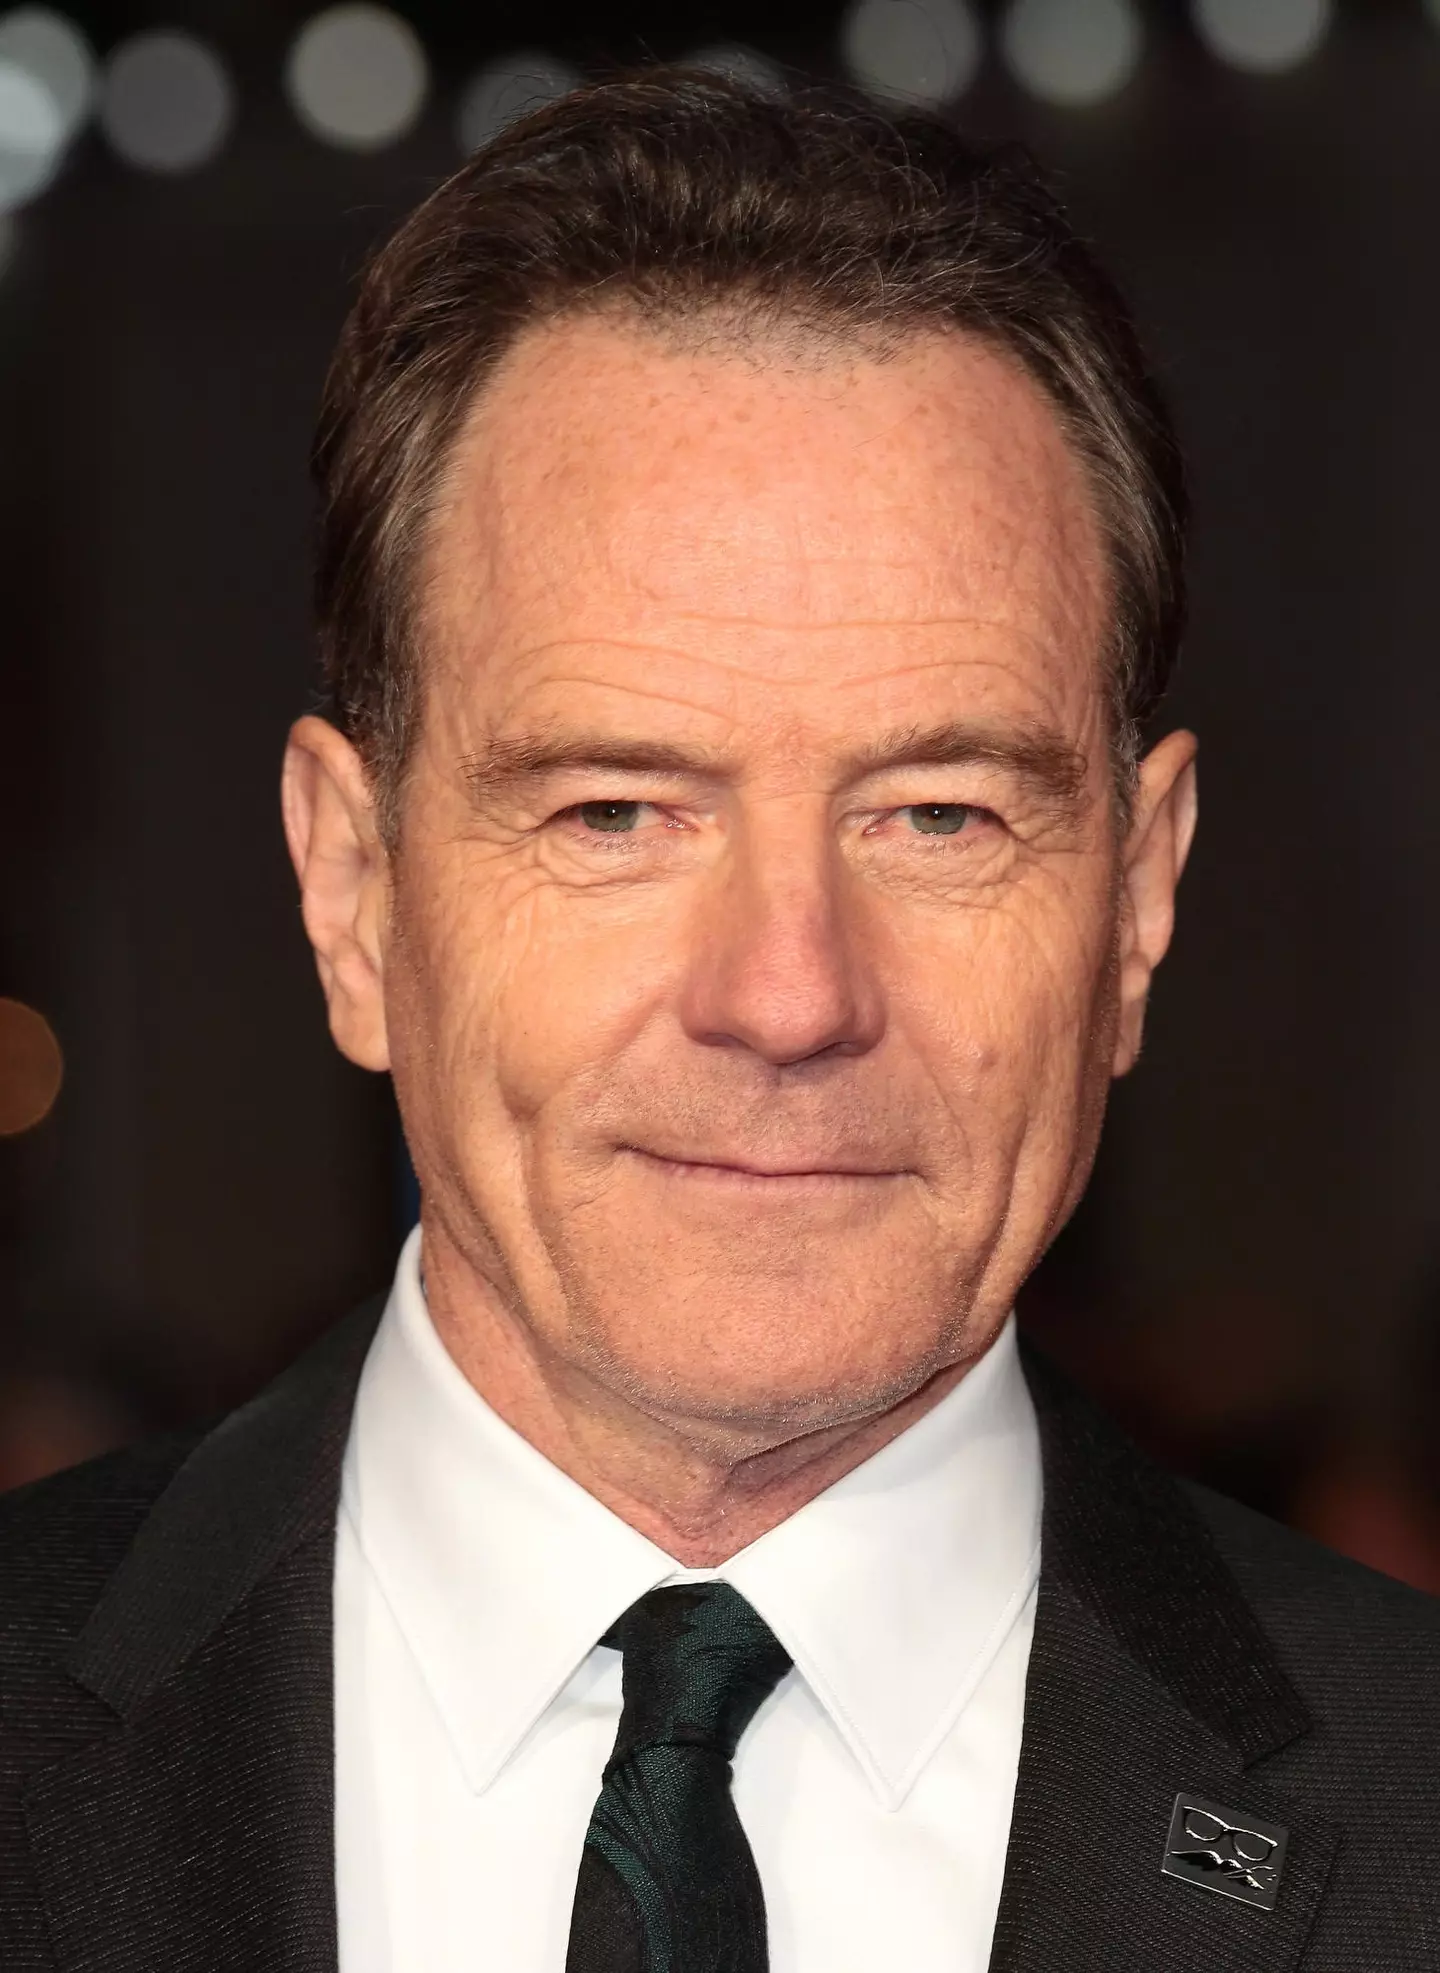 Cranston has said a Malcolm in the Middle movie could happen.